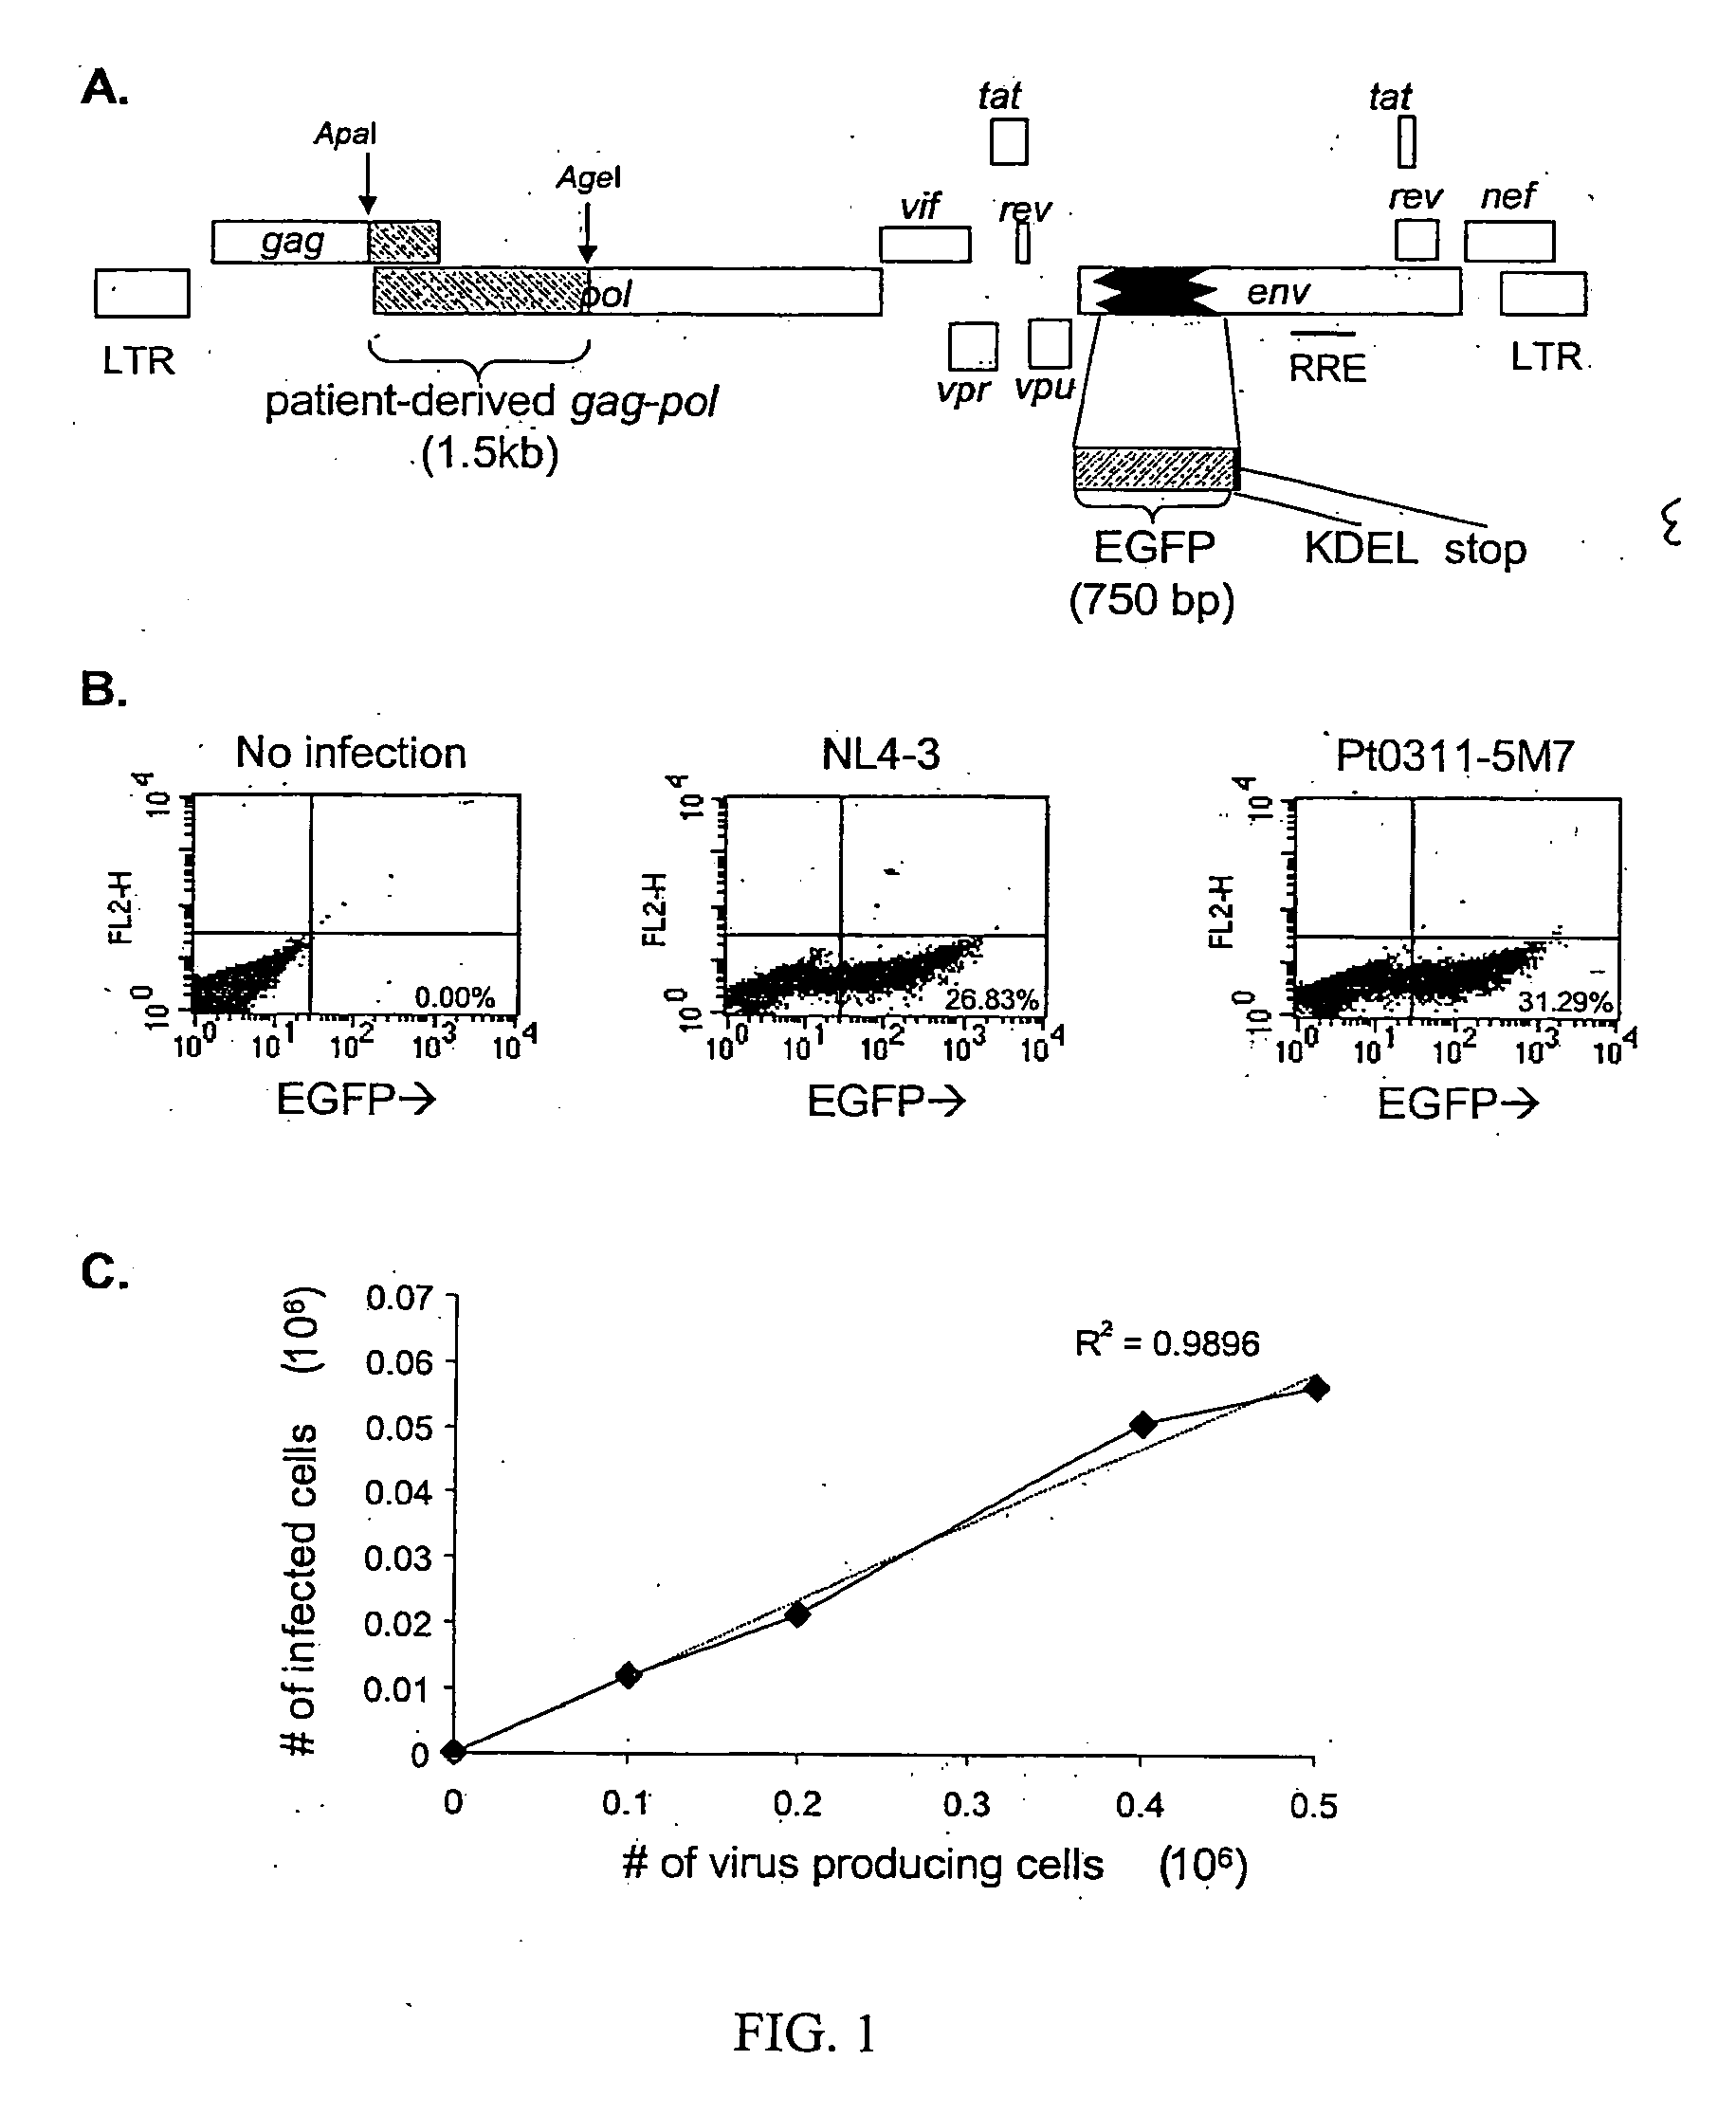 Single cell analysis of HIV replication capacity and drug resistance